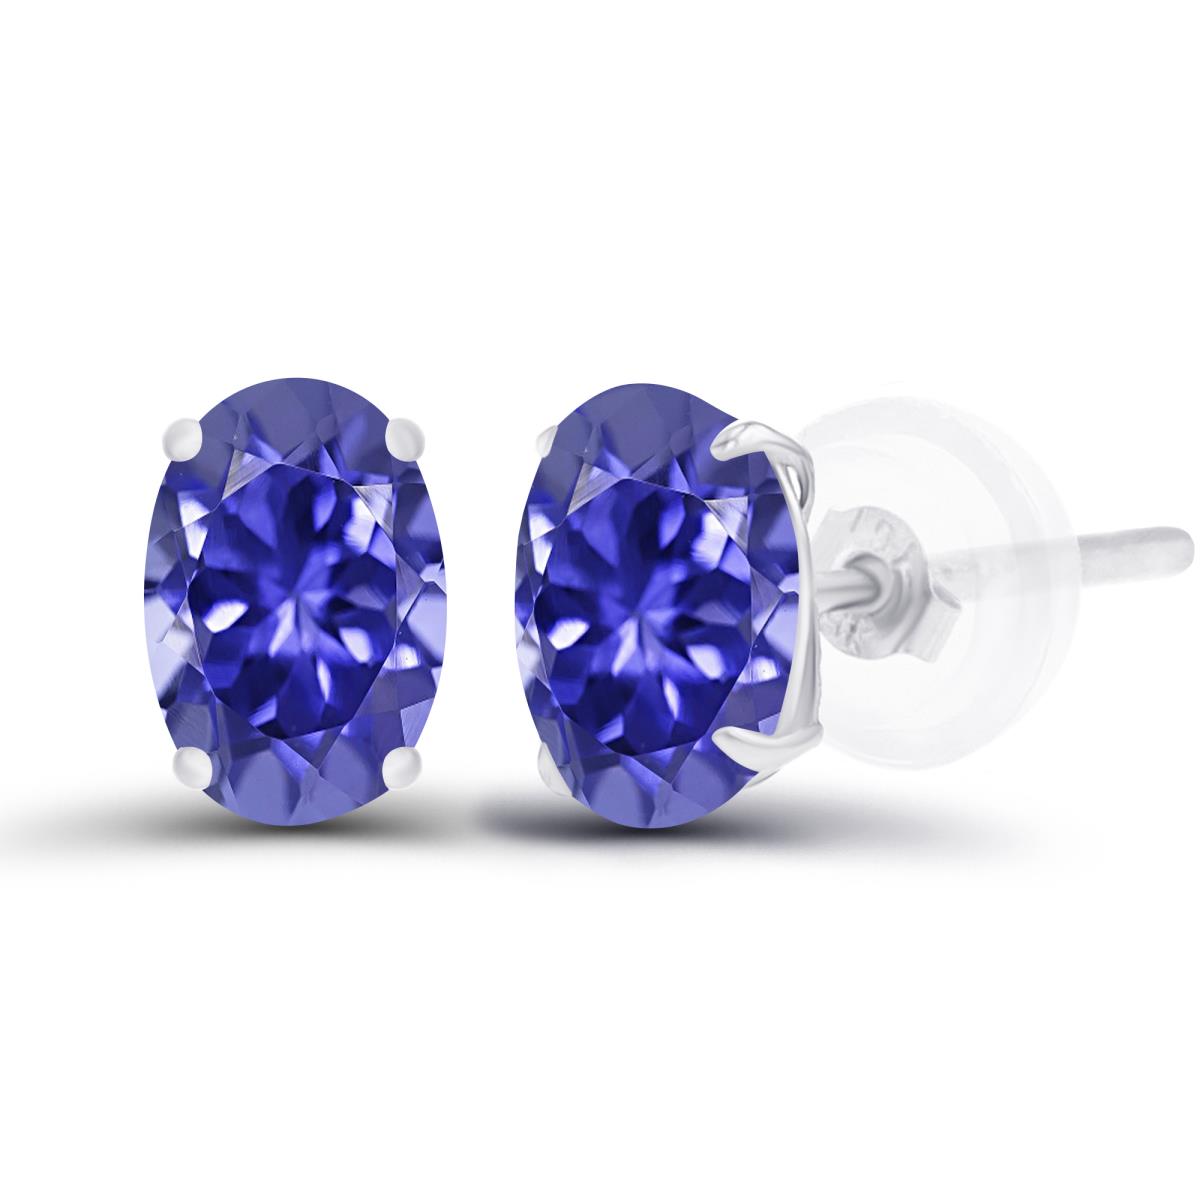 14K White Gold 6x4mm Oval Tanzanite Basket Stud Earrings with Silicone Back